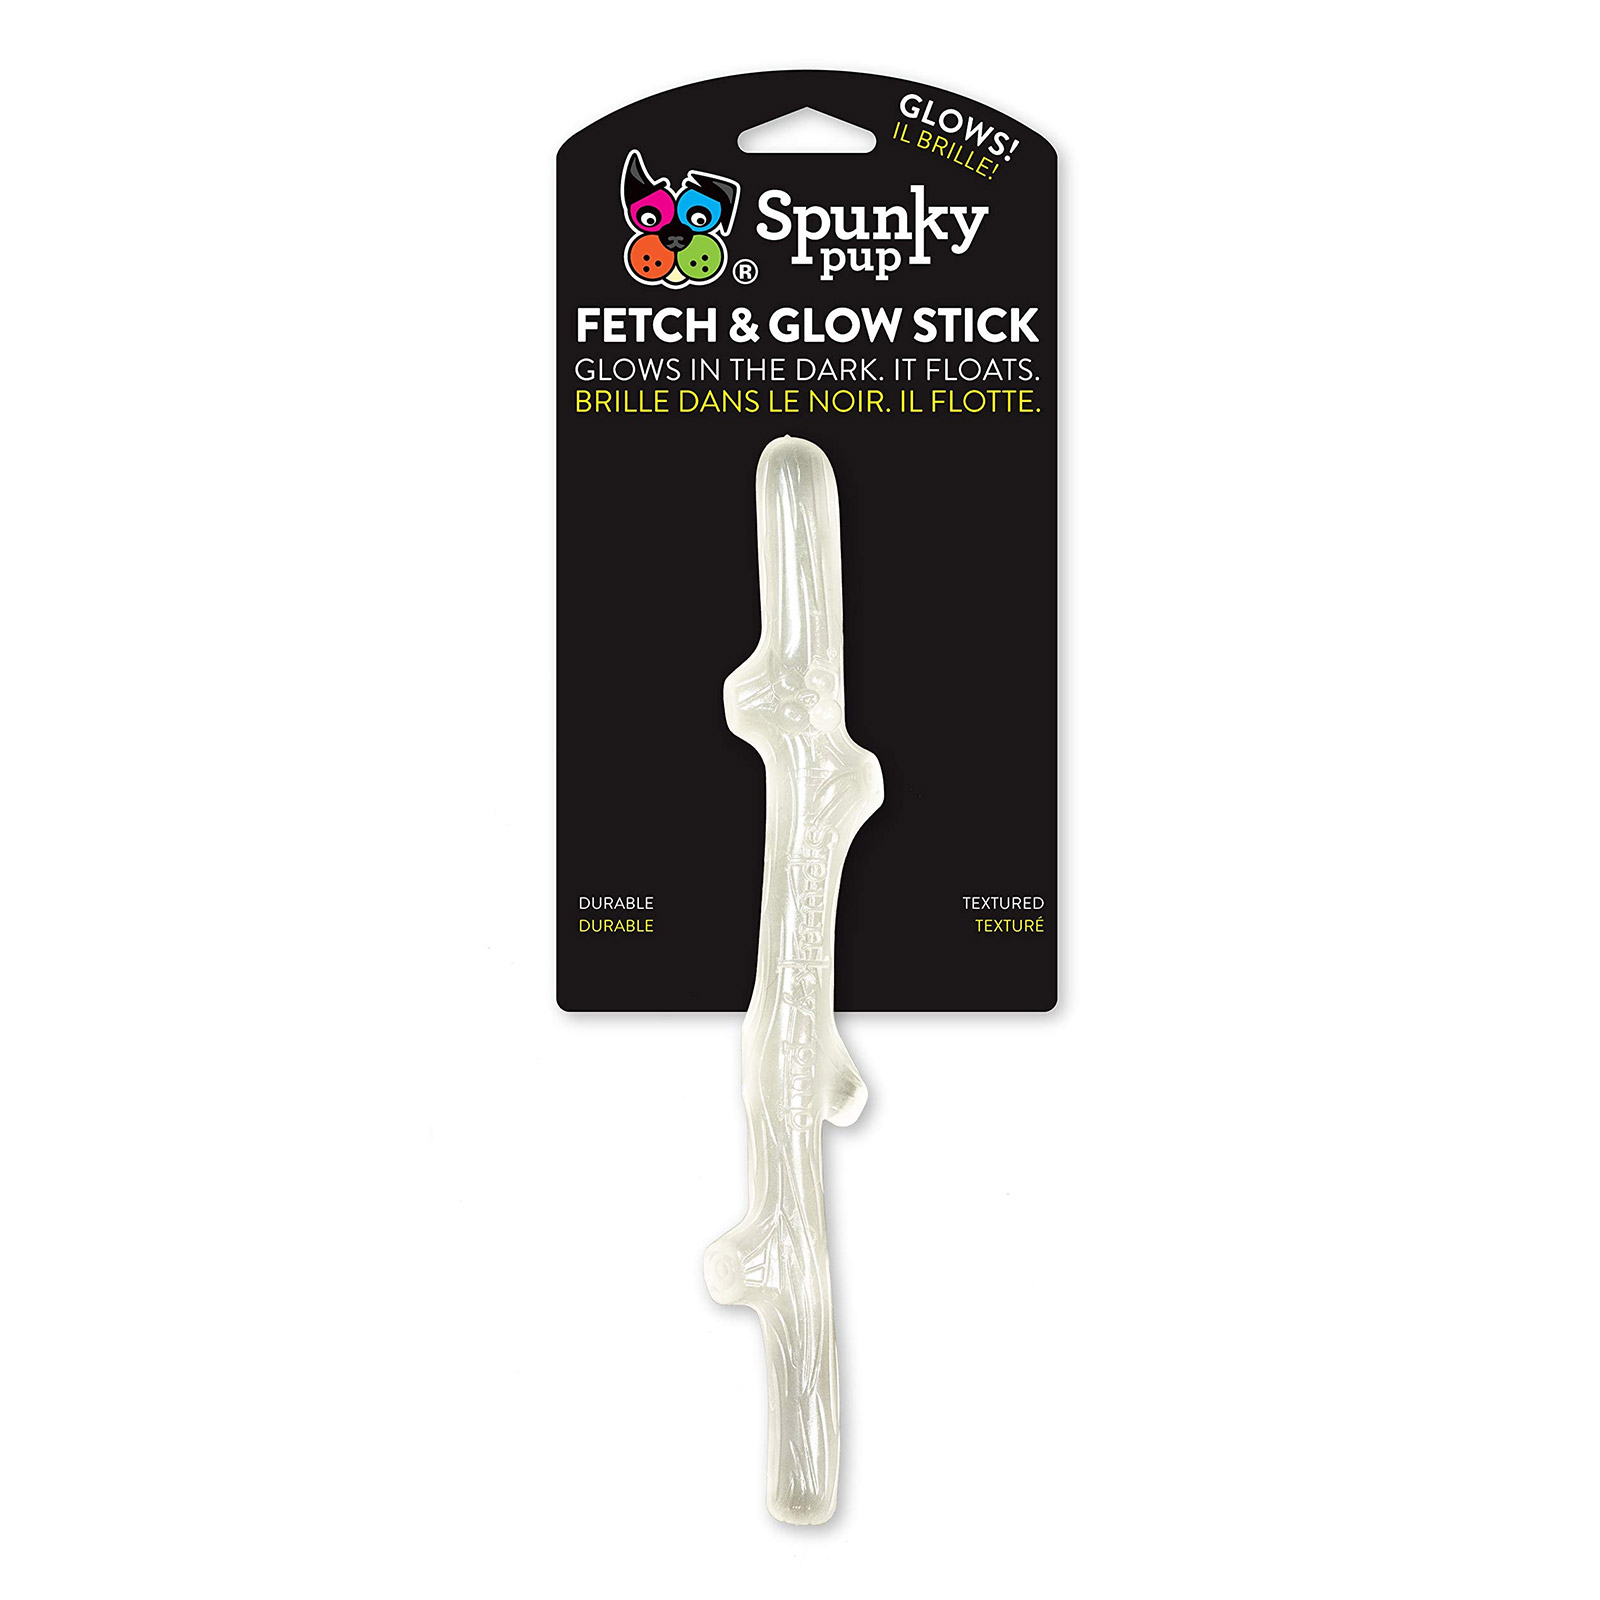 SPUNKY PUP GLOW STICK 30CM for Dogs